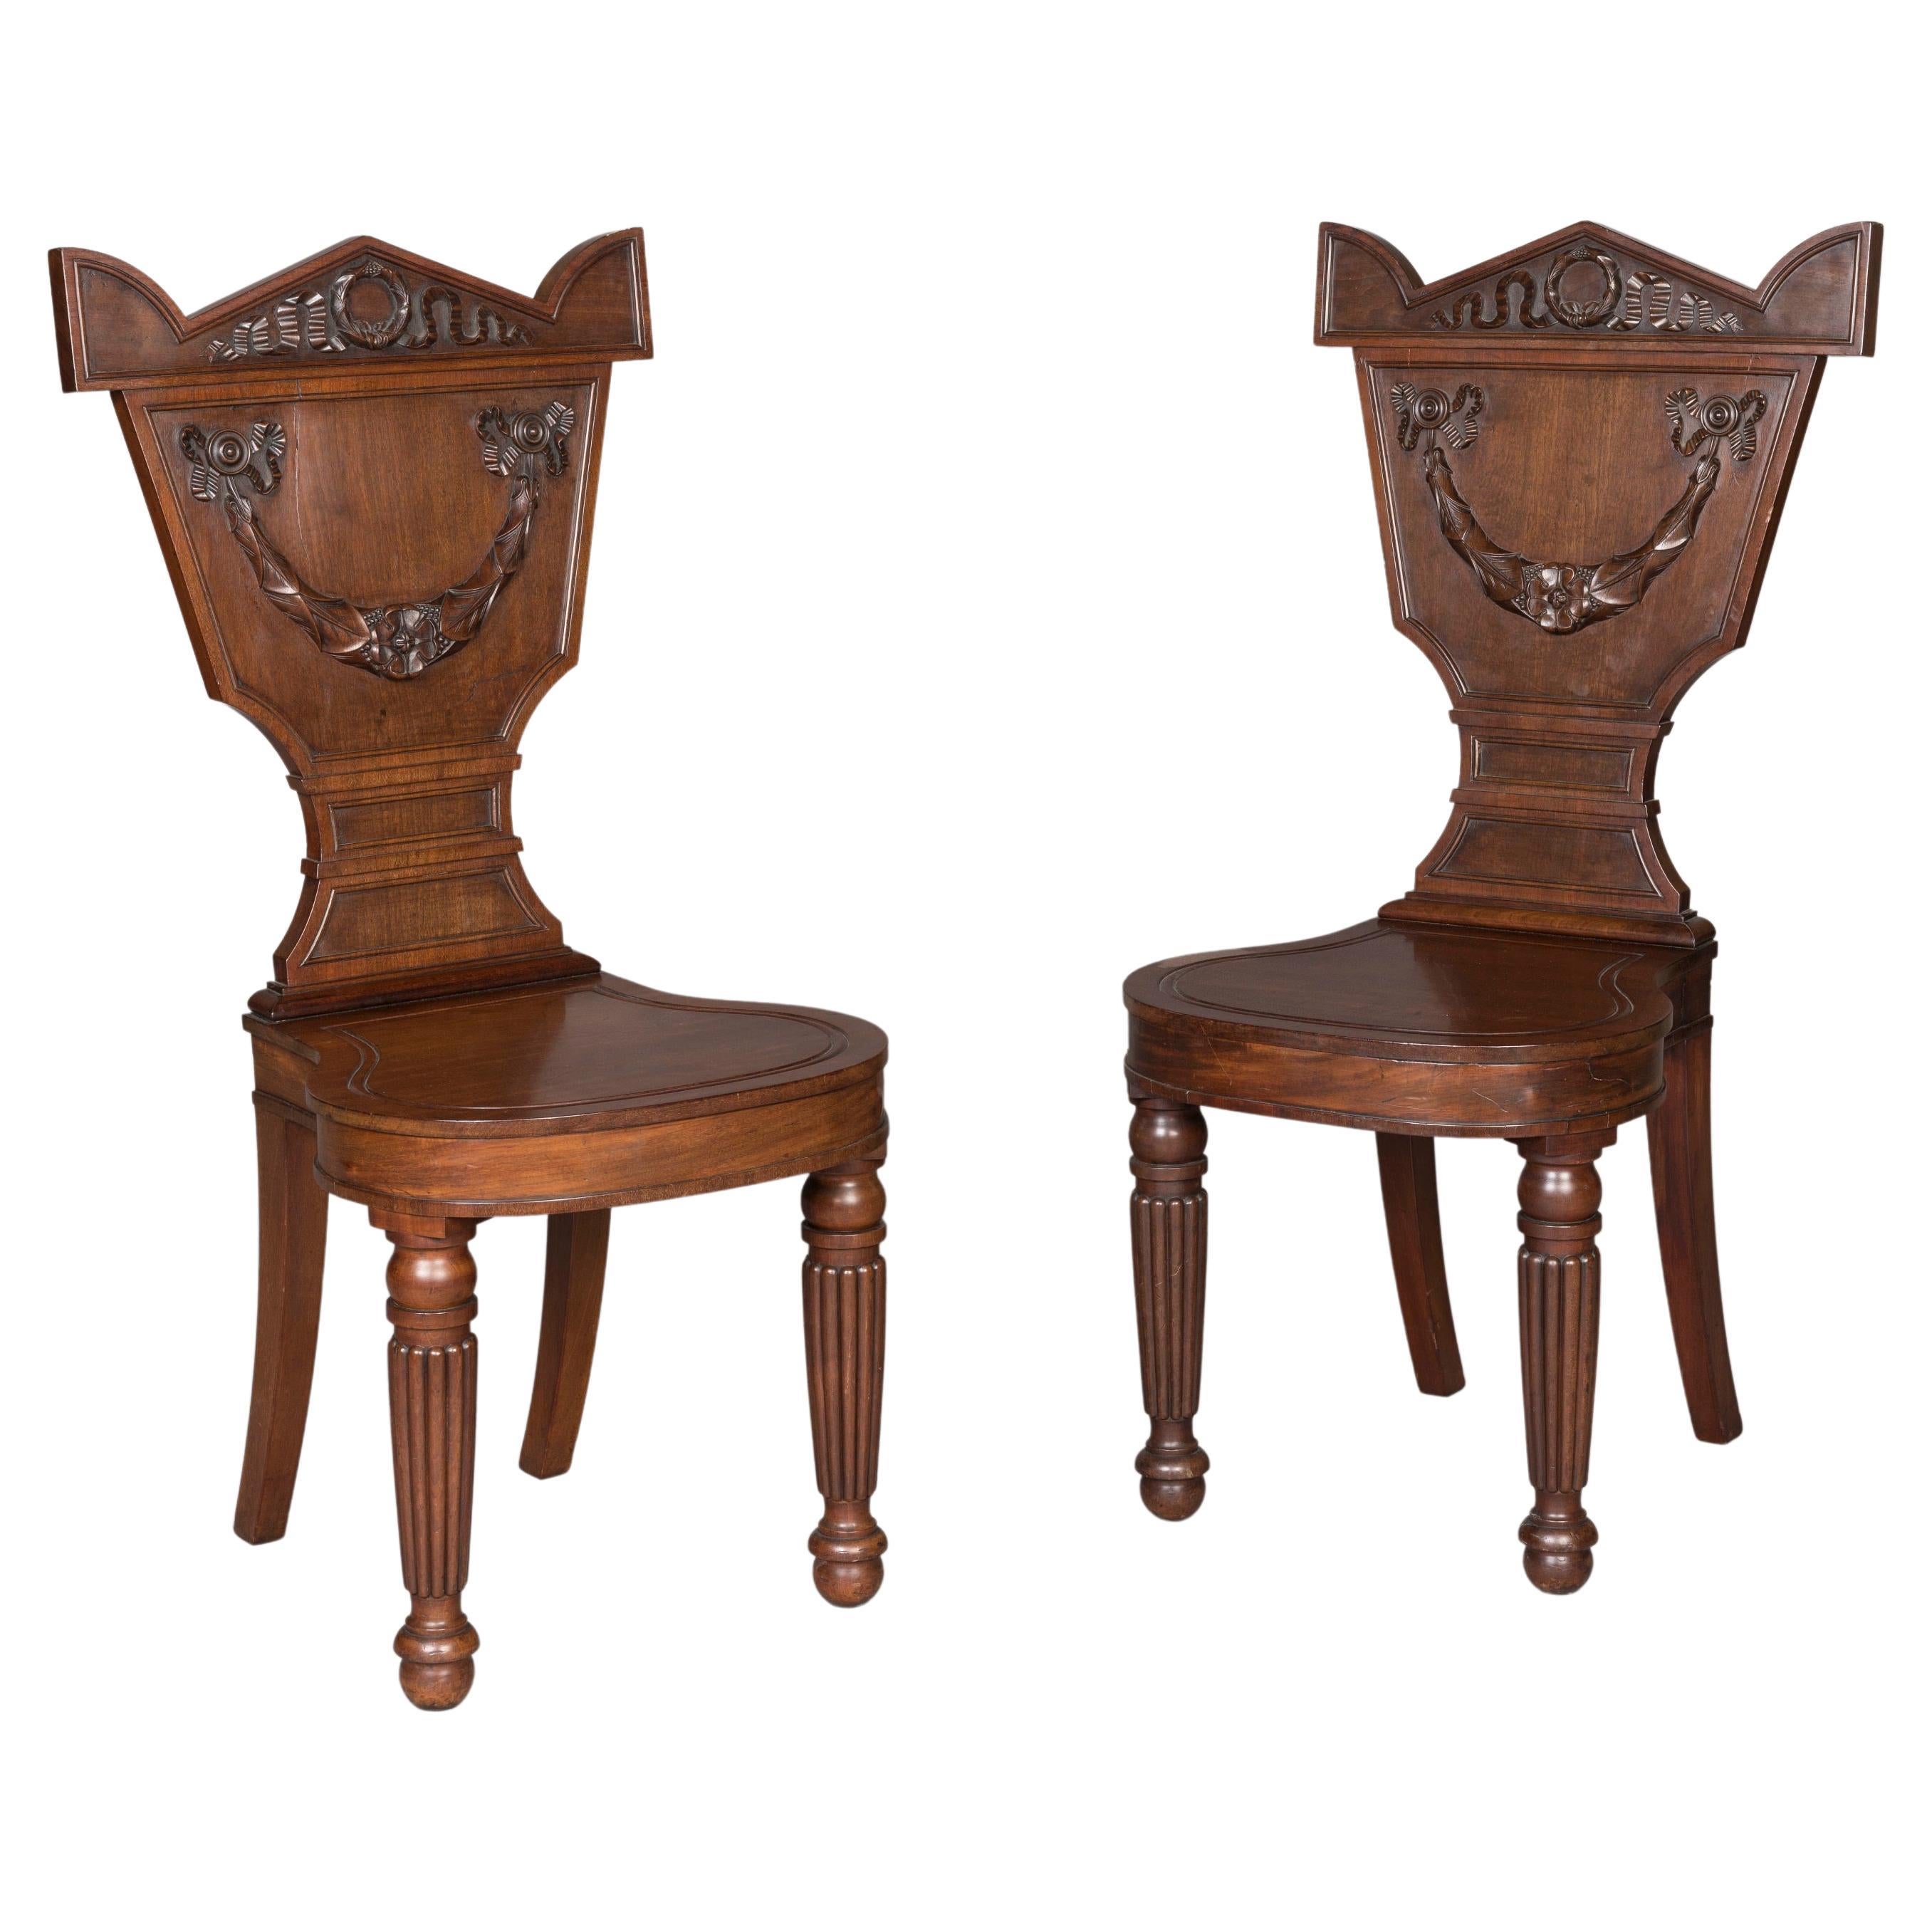 Pair of 19th Century Georgian Period Carved Mahogany Chairs